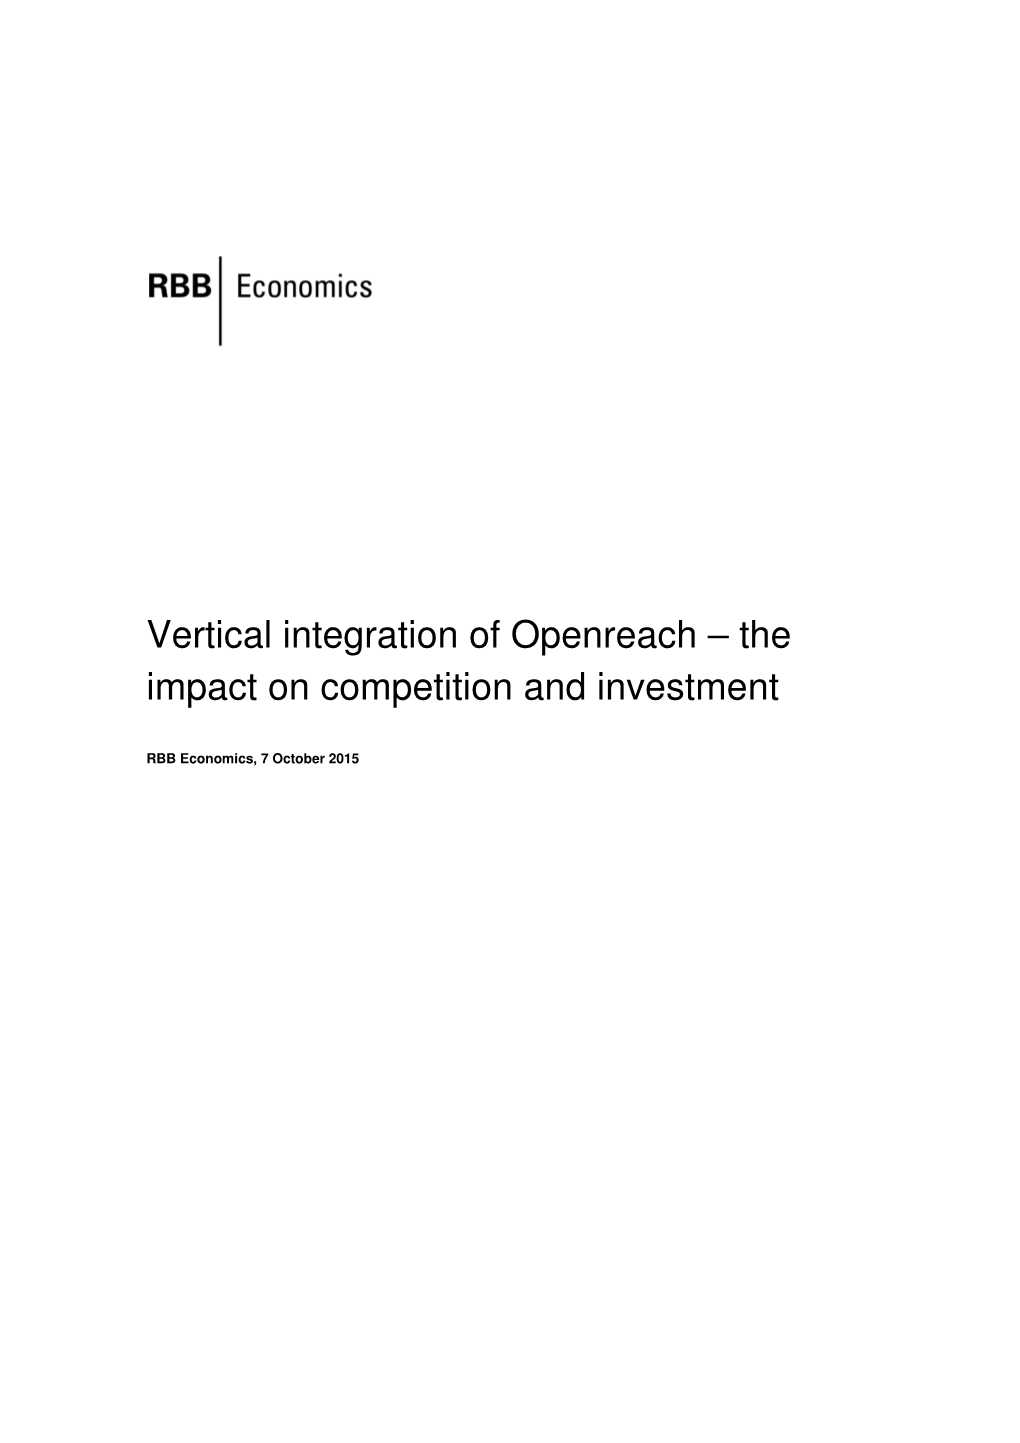 Vertical Integration of Openreach – the Impact on Competition and Investment